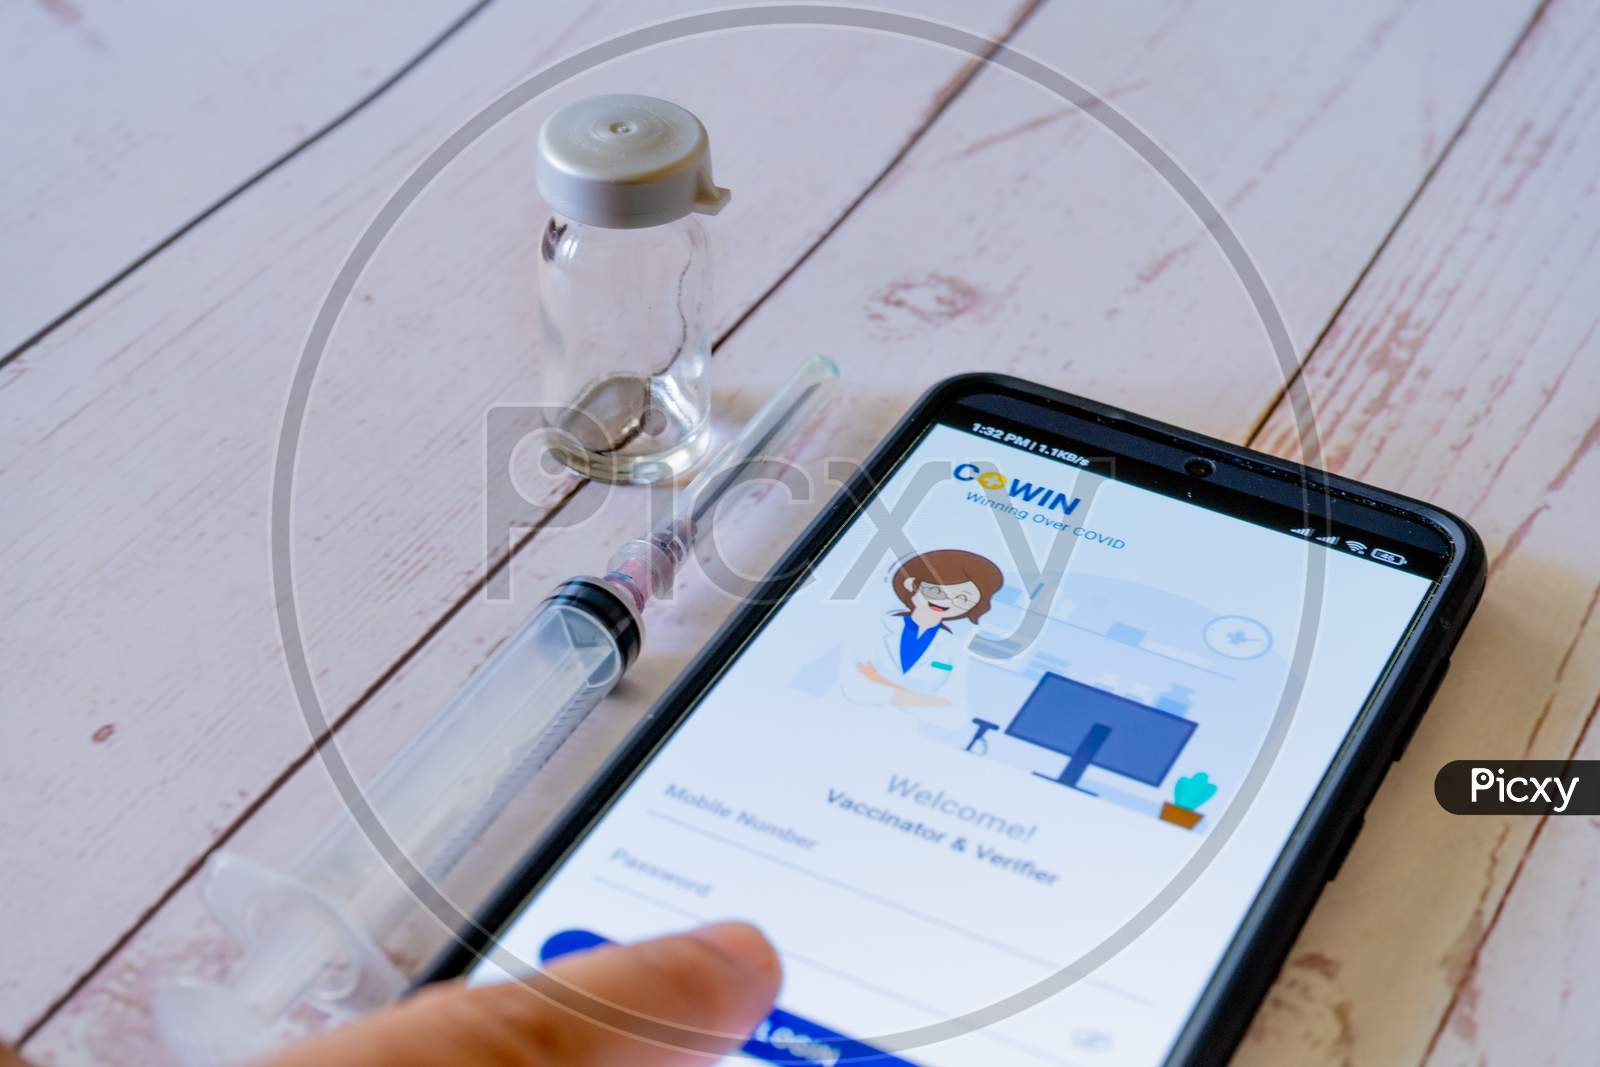 Man Doctor Pointing To Co-Win App Application While Getting Vaccinated With A Syringe And Vial As Covaxin Covishield Is Administered During The Covid19 Coronavirus Pandemic In India Asia